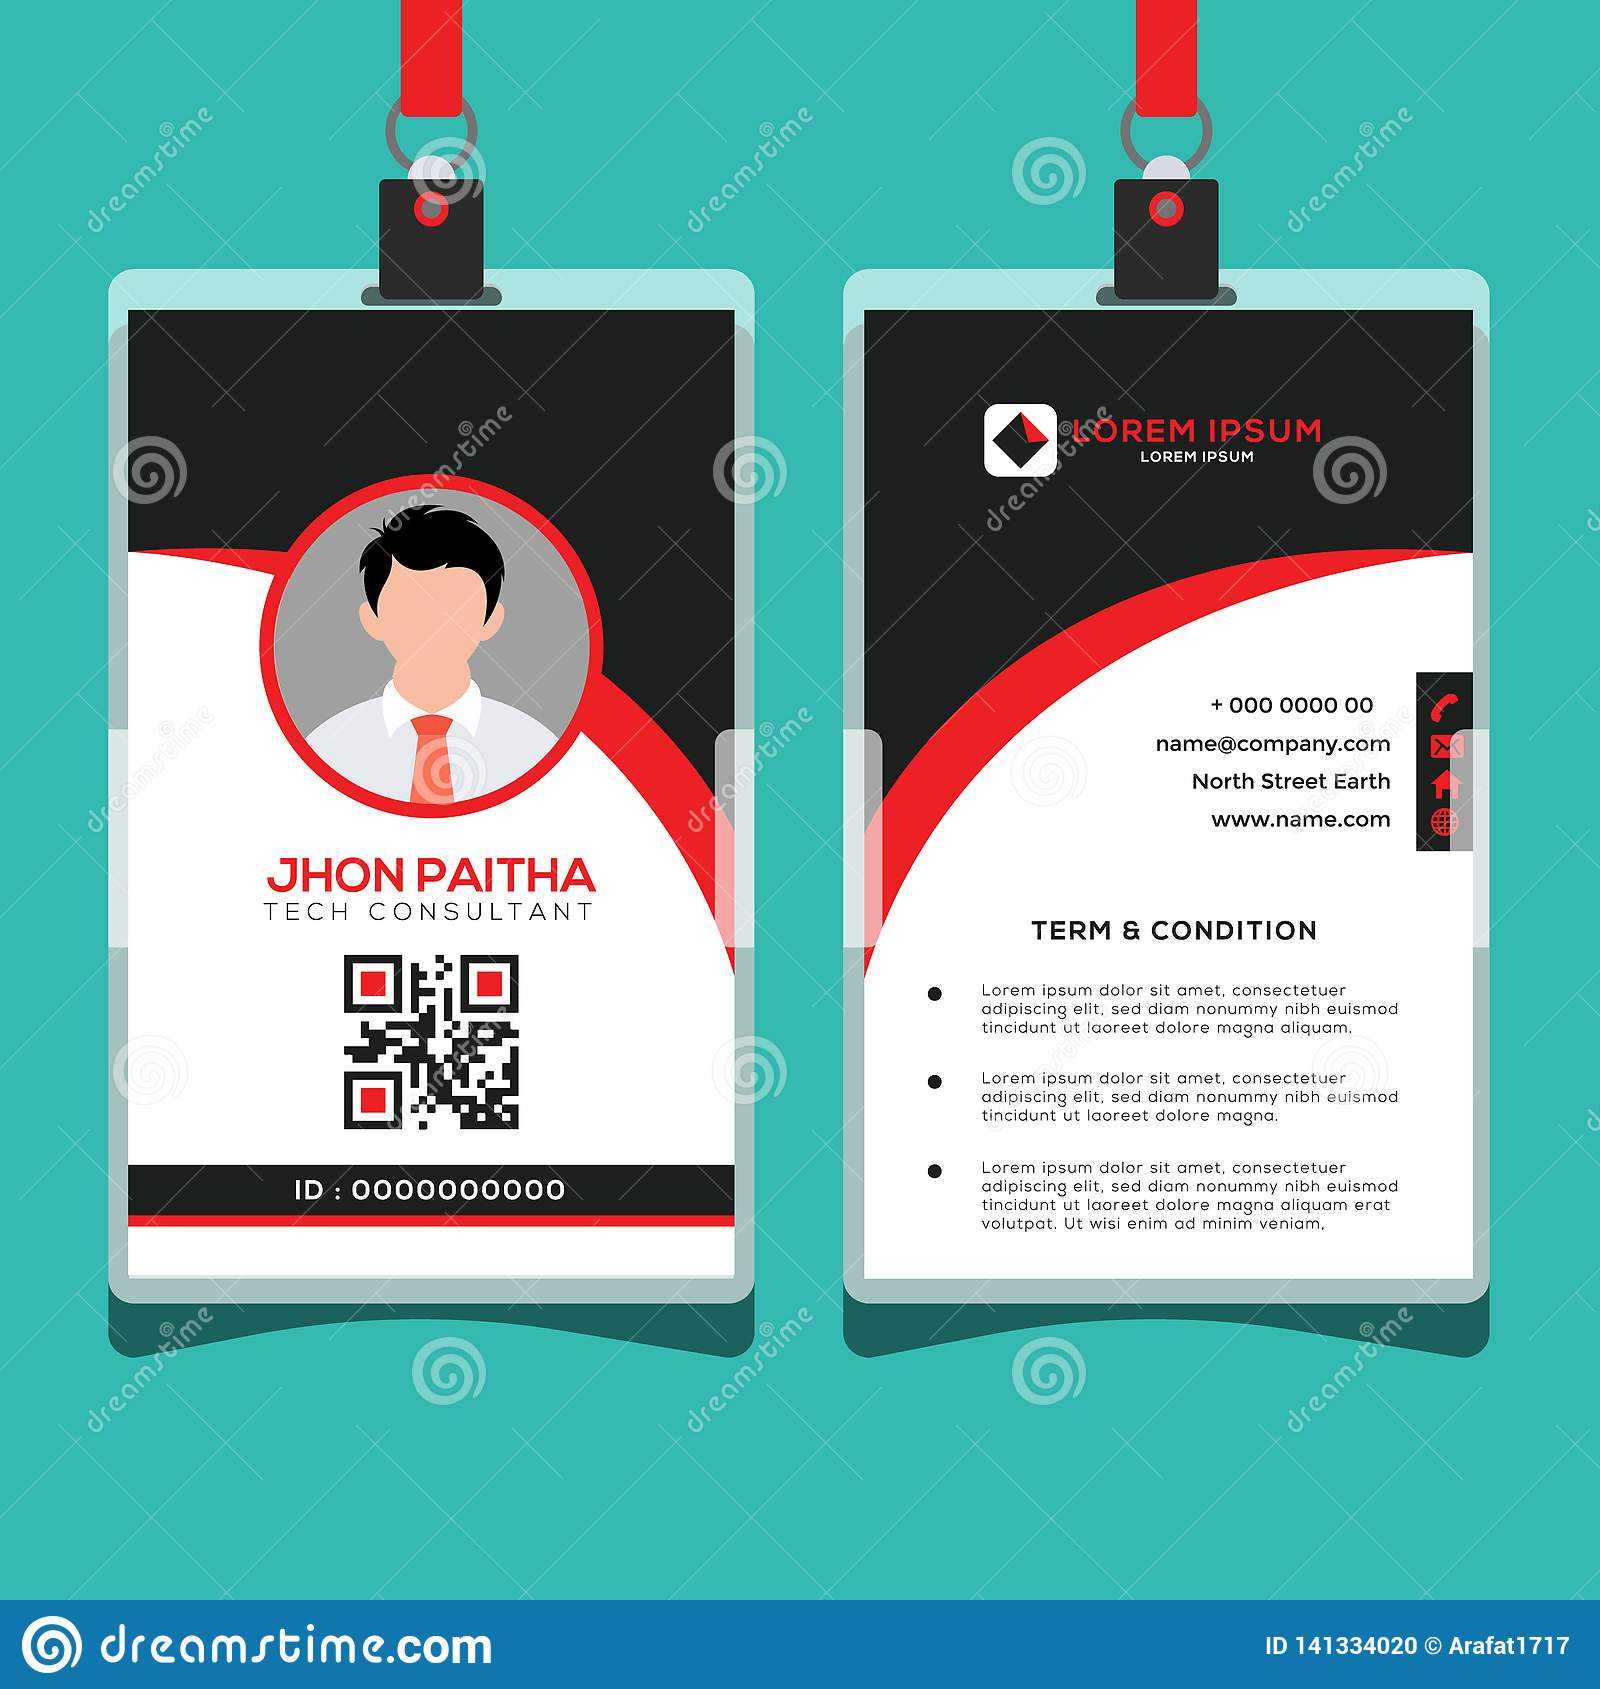 Corporate Id Card Design Template Stock Vector For Personal Identification Card Template